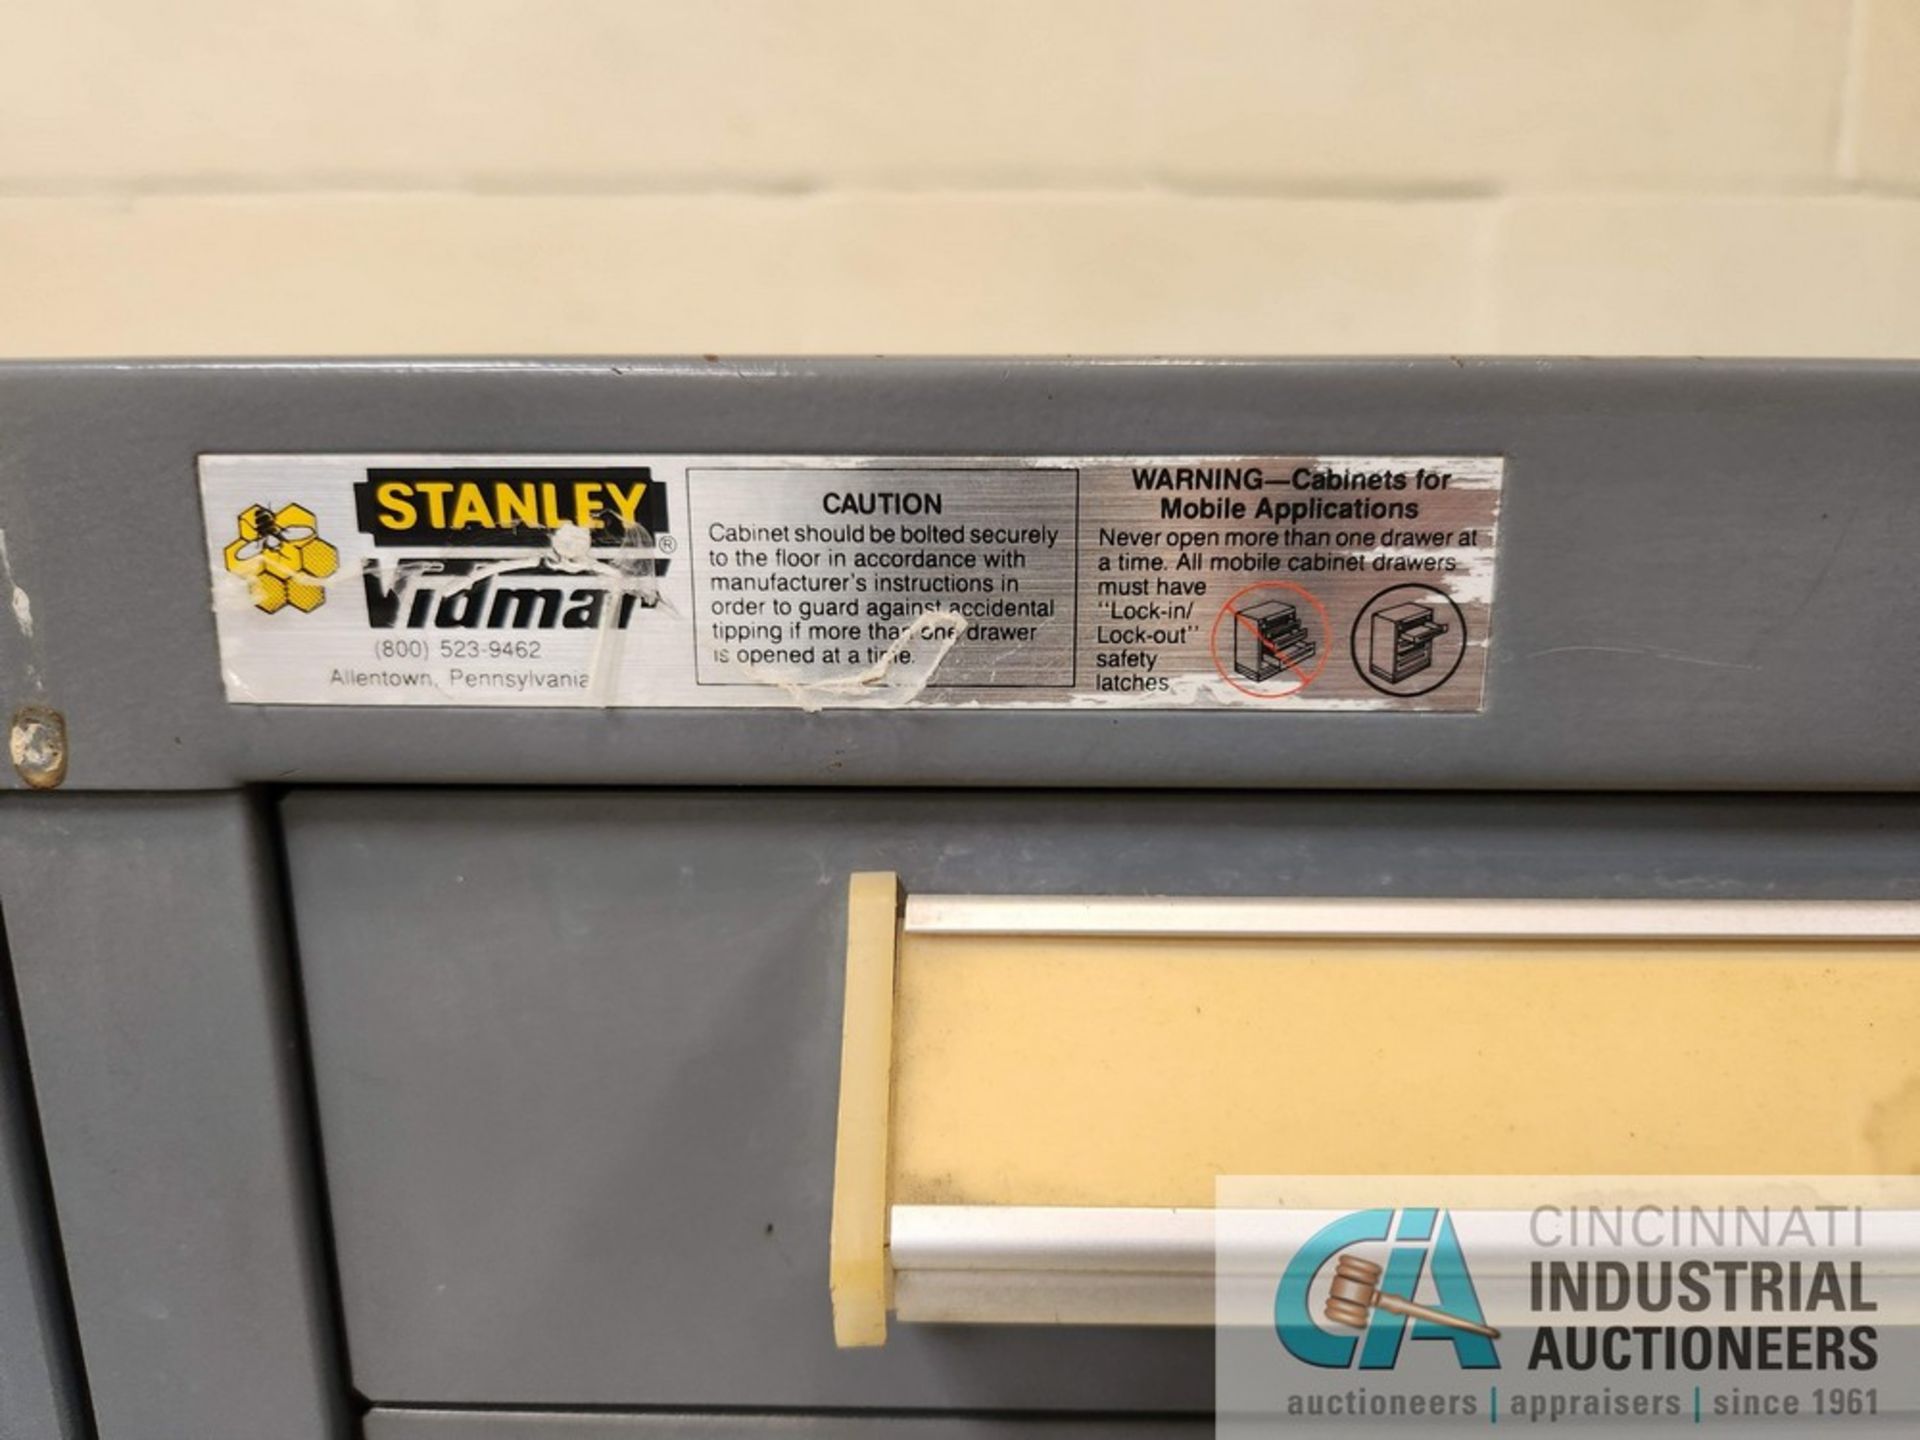 15-DRAWER STANLEY VIDMAR TOOLING CABINET W/ GRINDING STONES, ABRASIVES, ALLEN WRENCHES, DRILLS, - Image 2 of 17